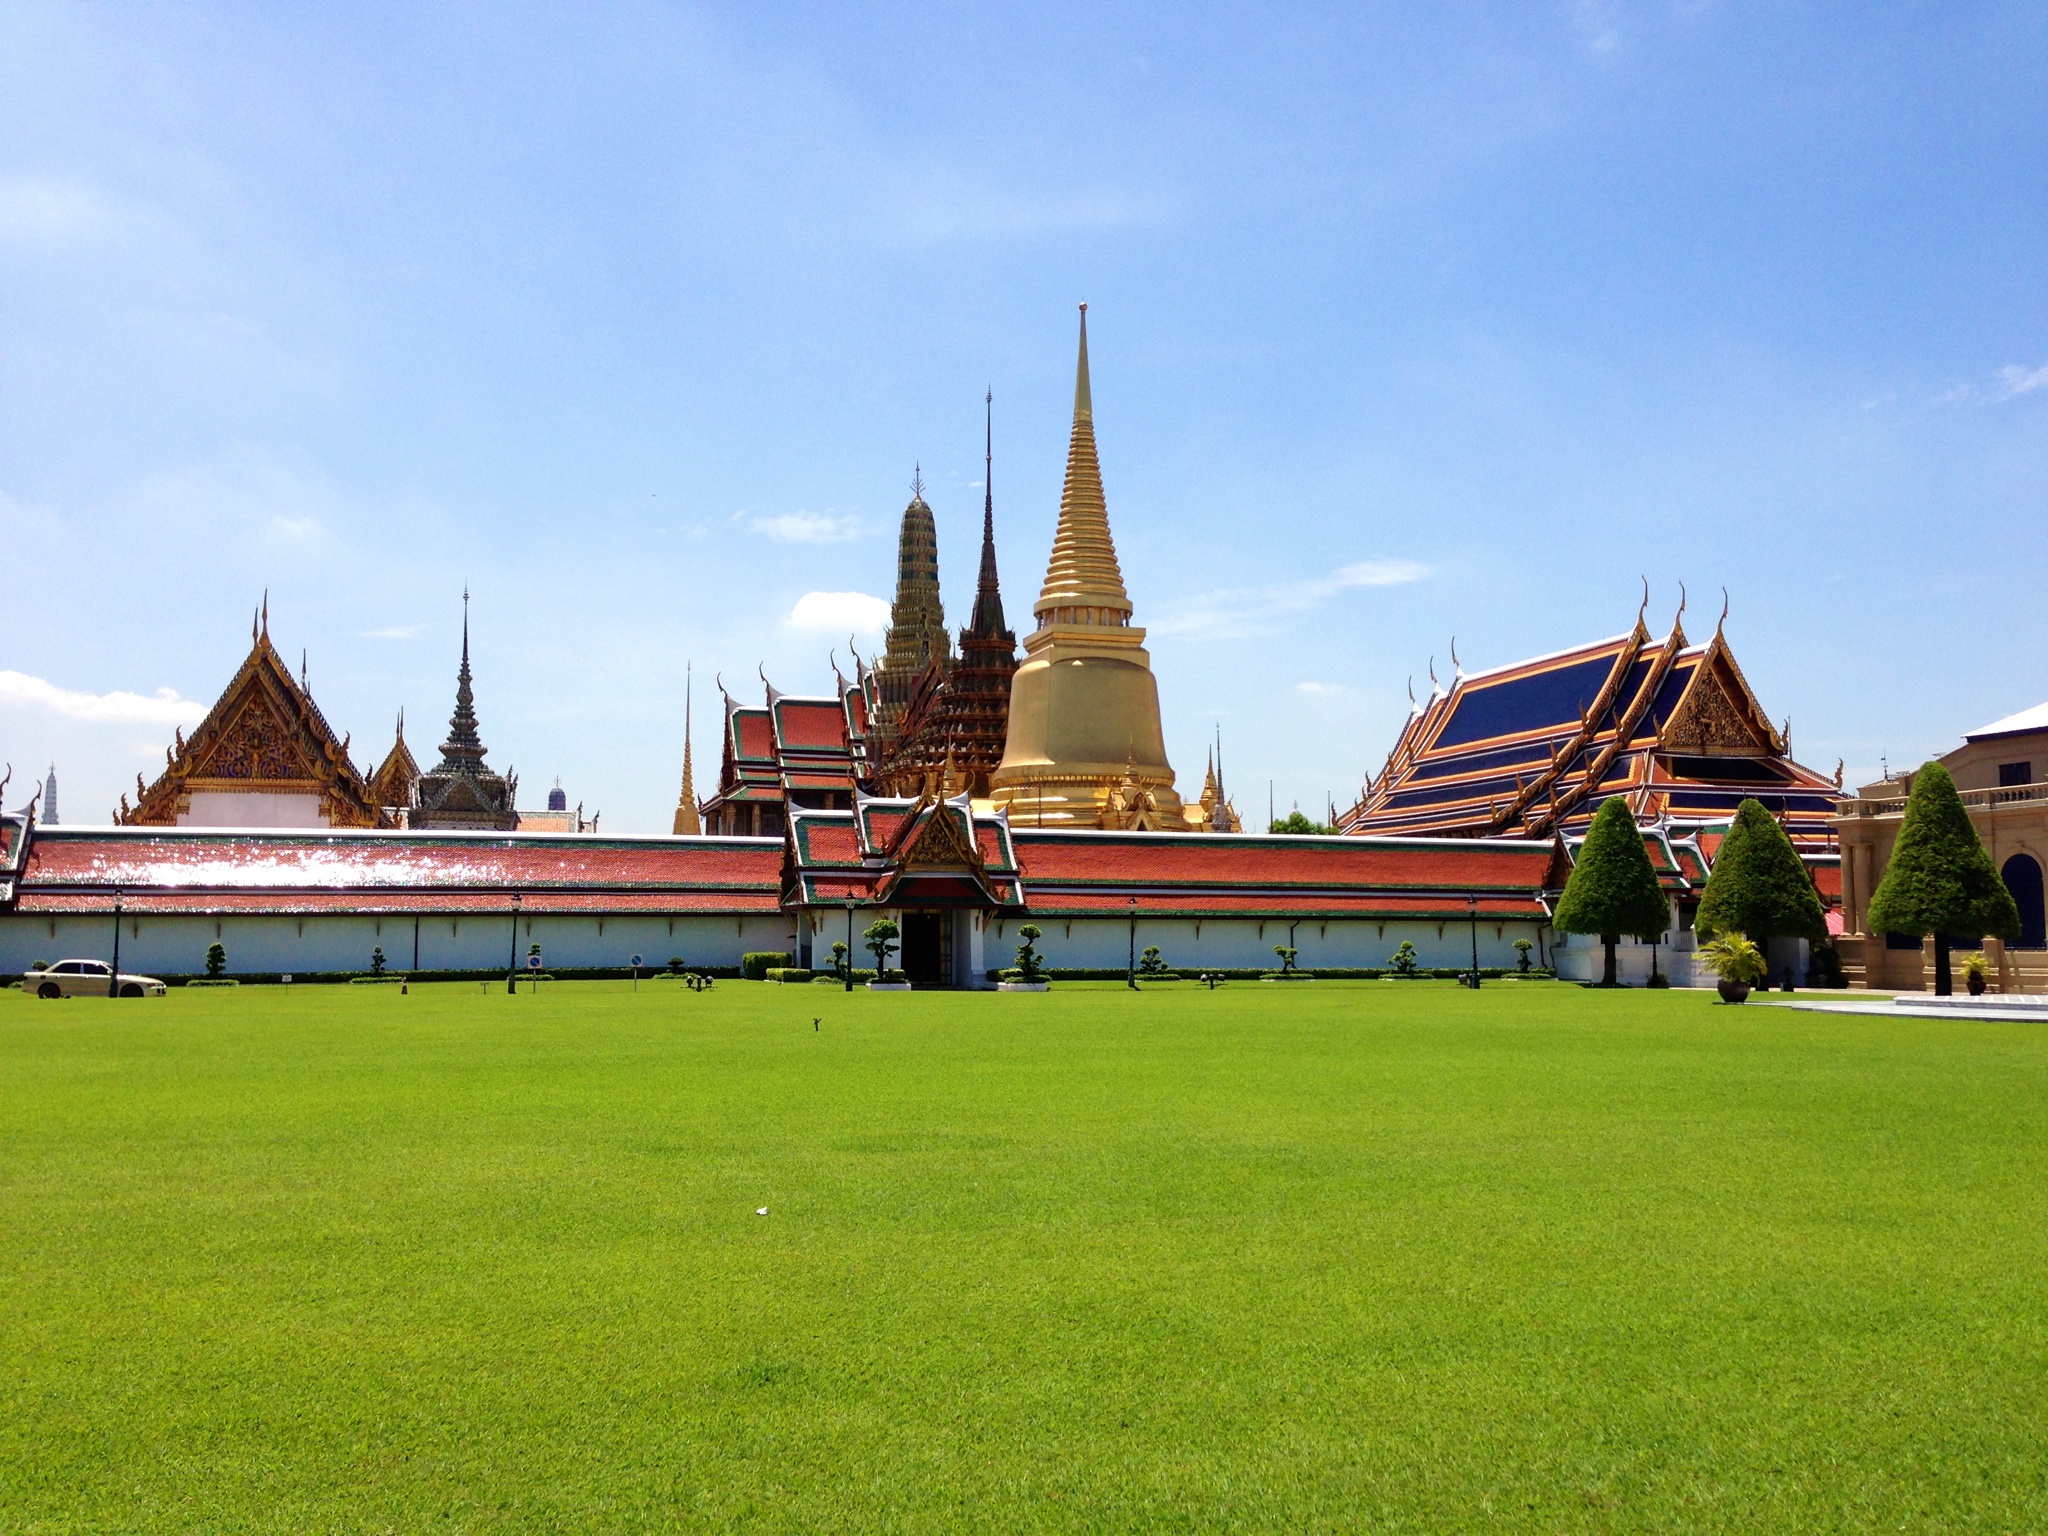 Floating Market and The Grand Palace